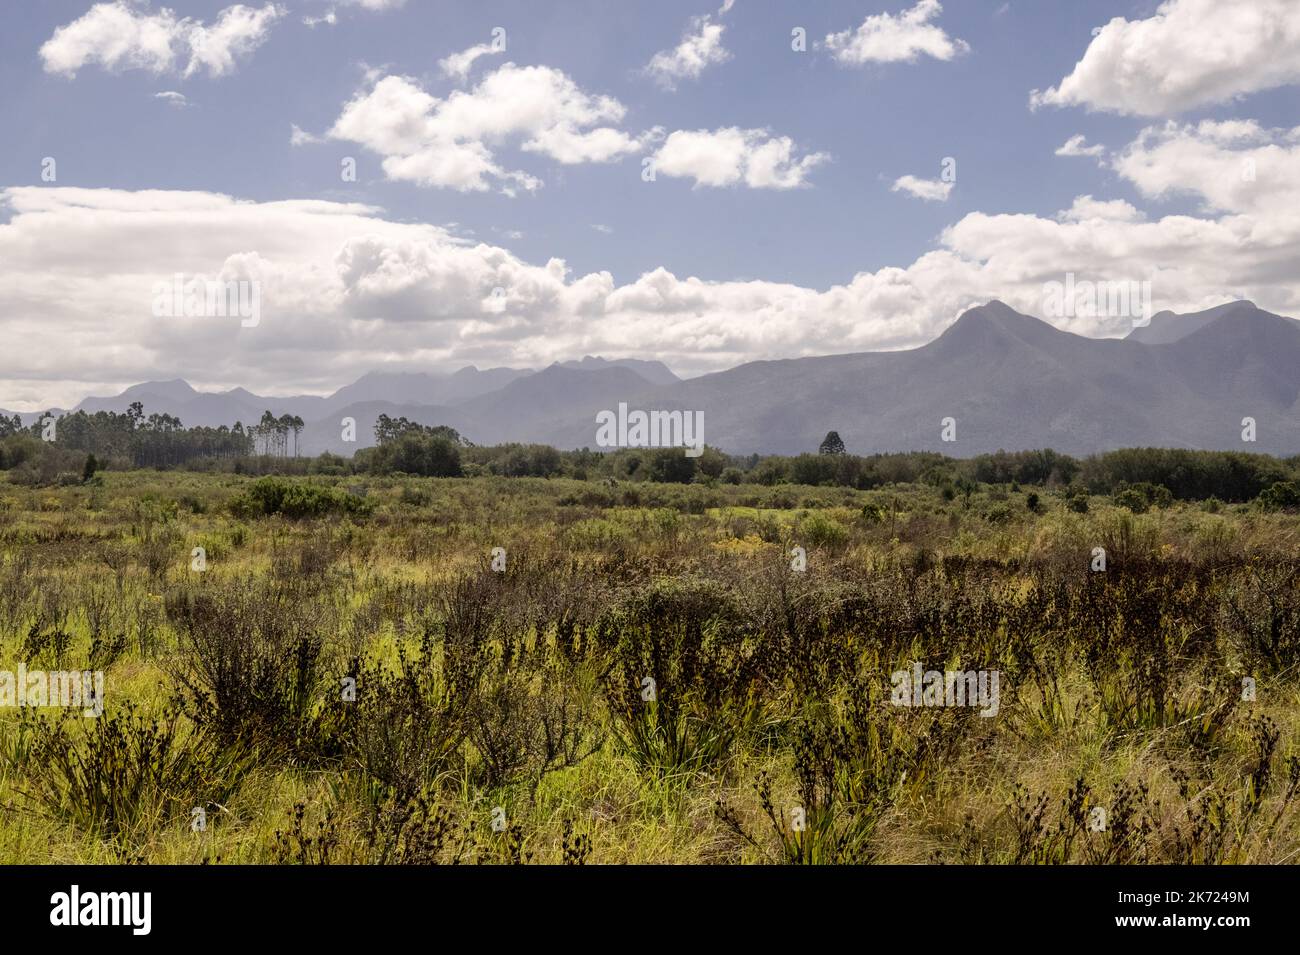 Colorful and Sunny landscape in Eastern cape with green indigenous fynbos or brushing and mountain range in background Stock Photo